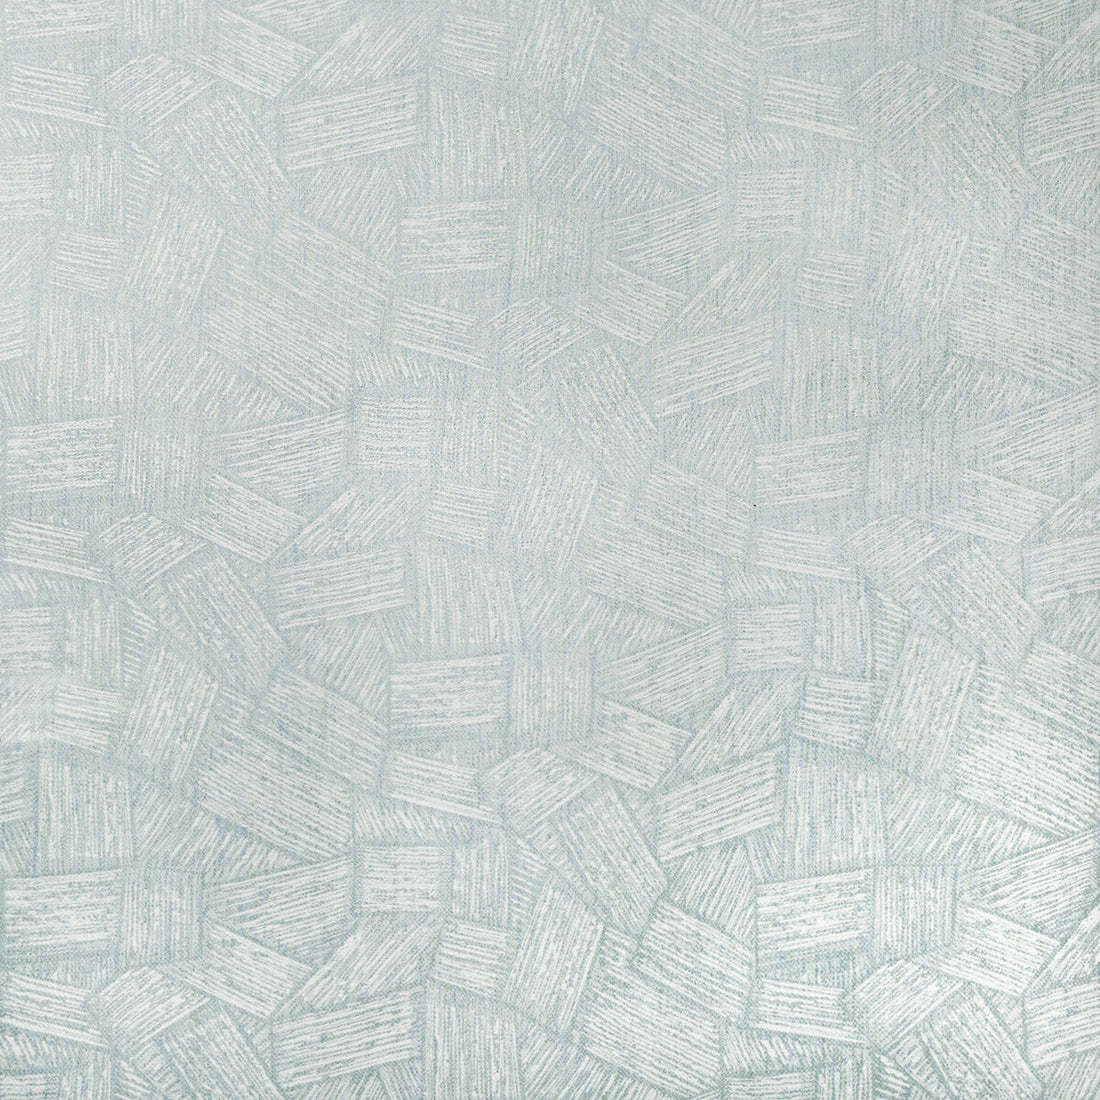 Legno fabric in sea color - pattern 35493.15.0 - by Kravet Couture in the Vista collection